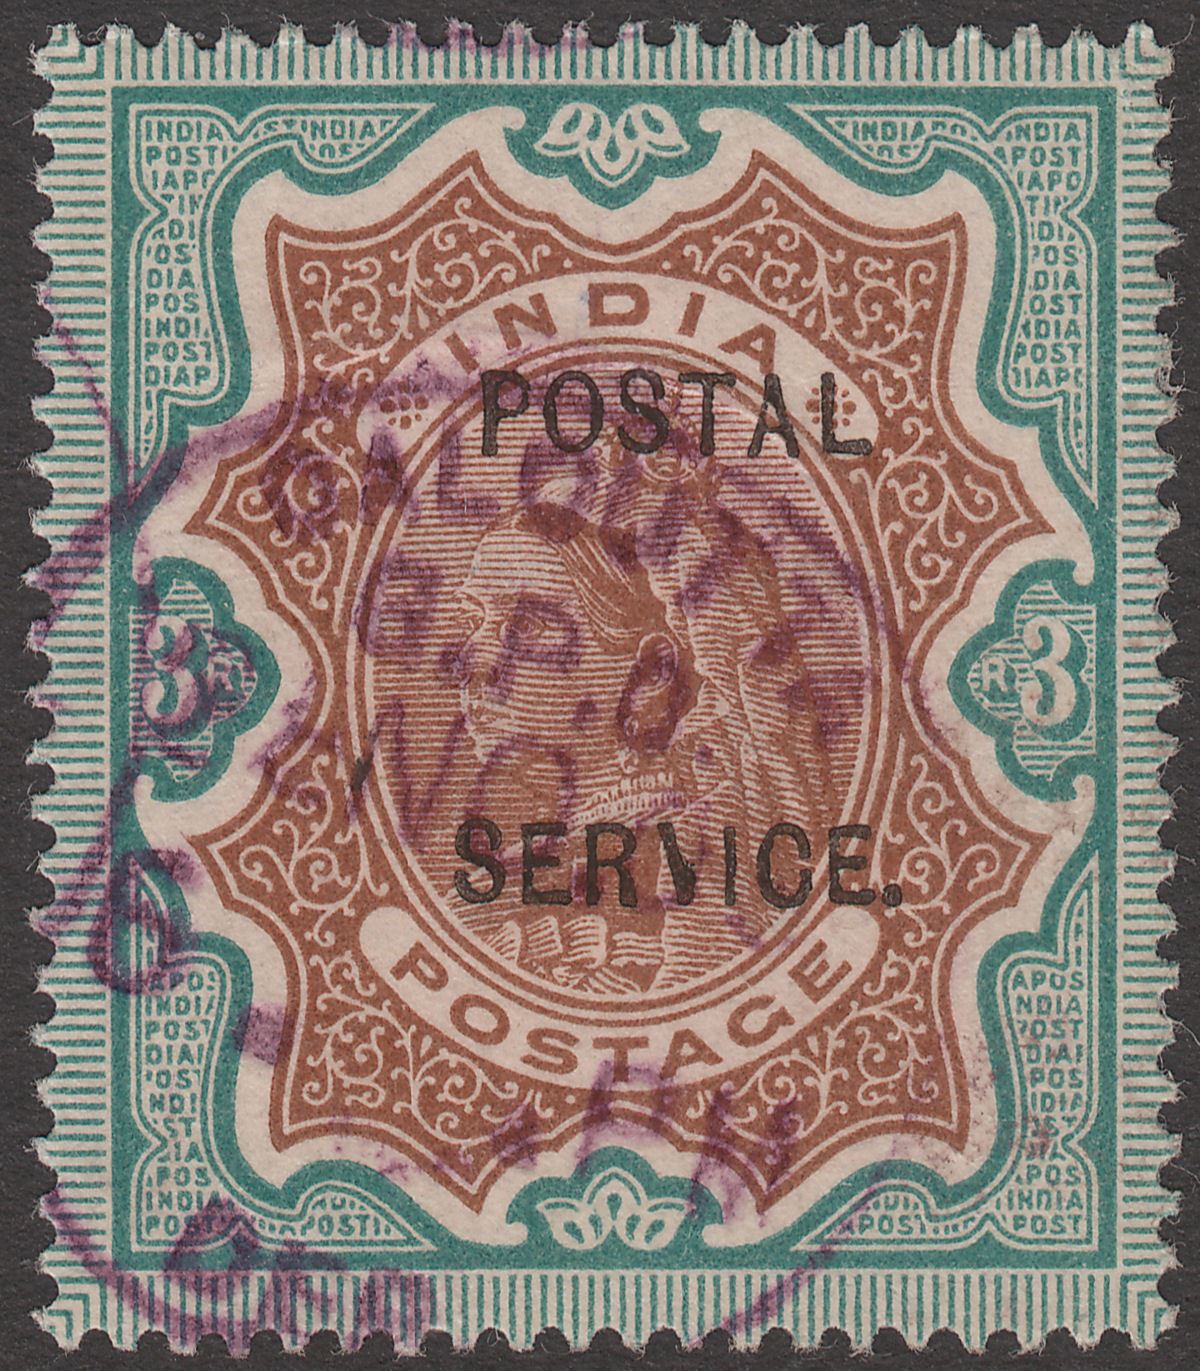 India 1895 QV Revenue Postal Service Overprint 3r Green and Brown Used